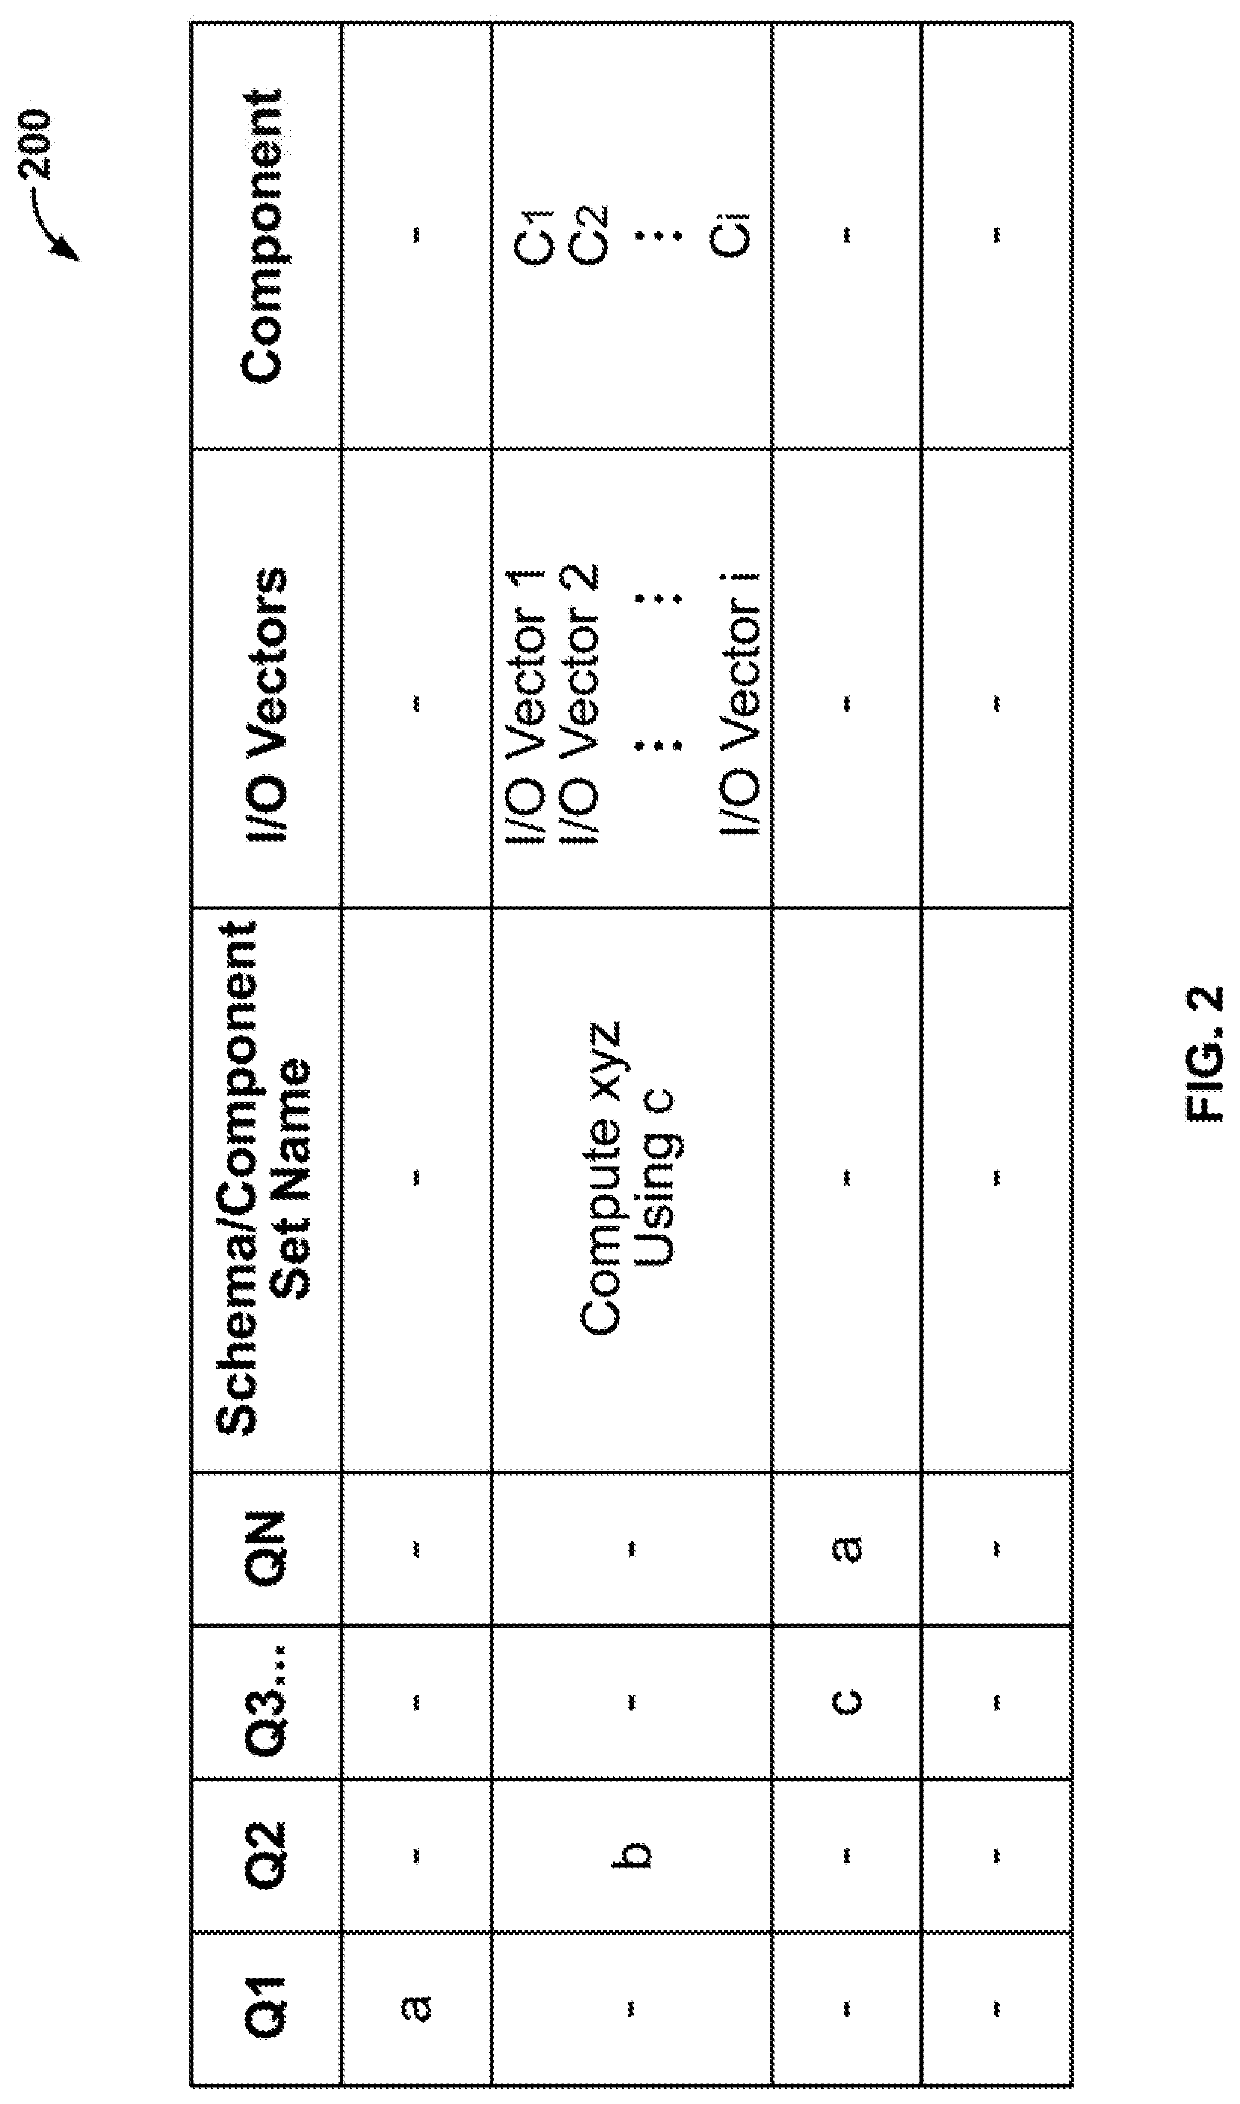 Device, Method, and System for Synthesizing Variants of Semantically Equivalent Computer Source Code using Computer Source Code Components to Protect Against Cyberattacks